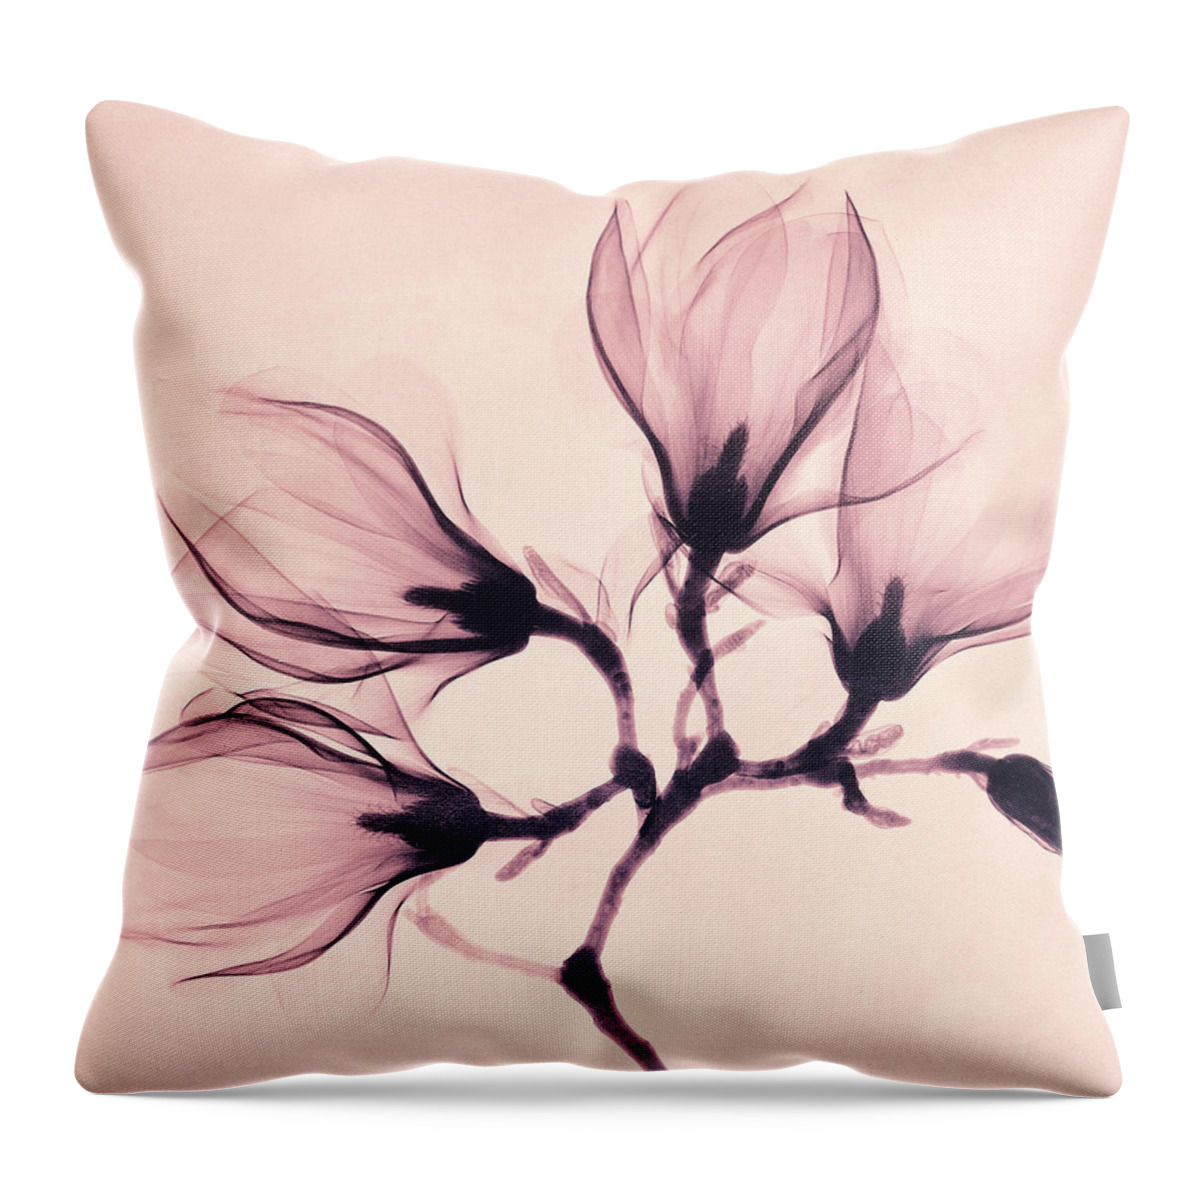 Magnolia Throw Pillow featuring the painting Whisper Magnolia by Mindy Sommers